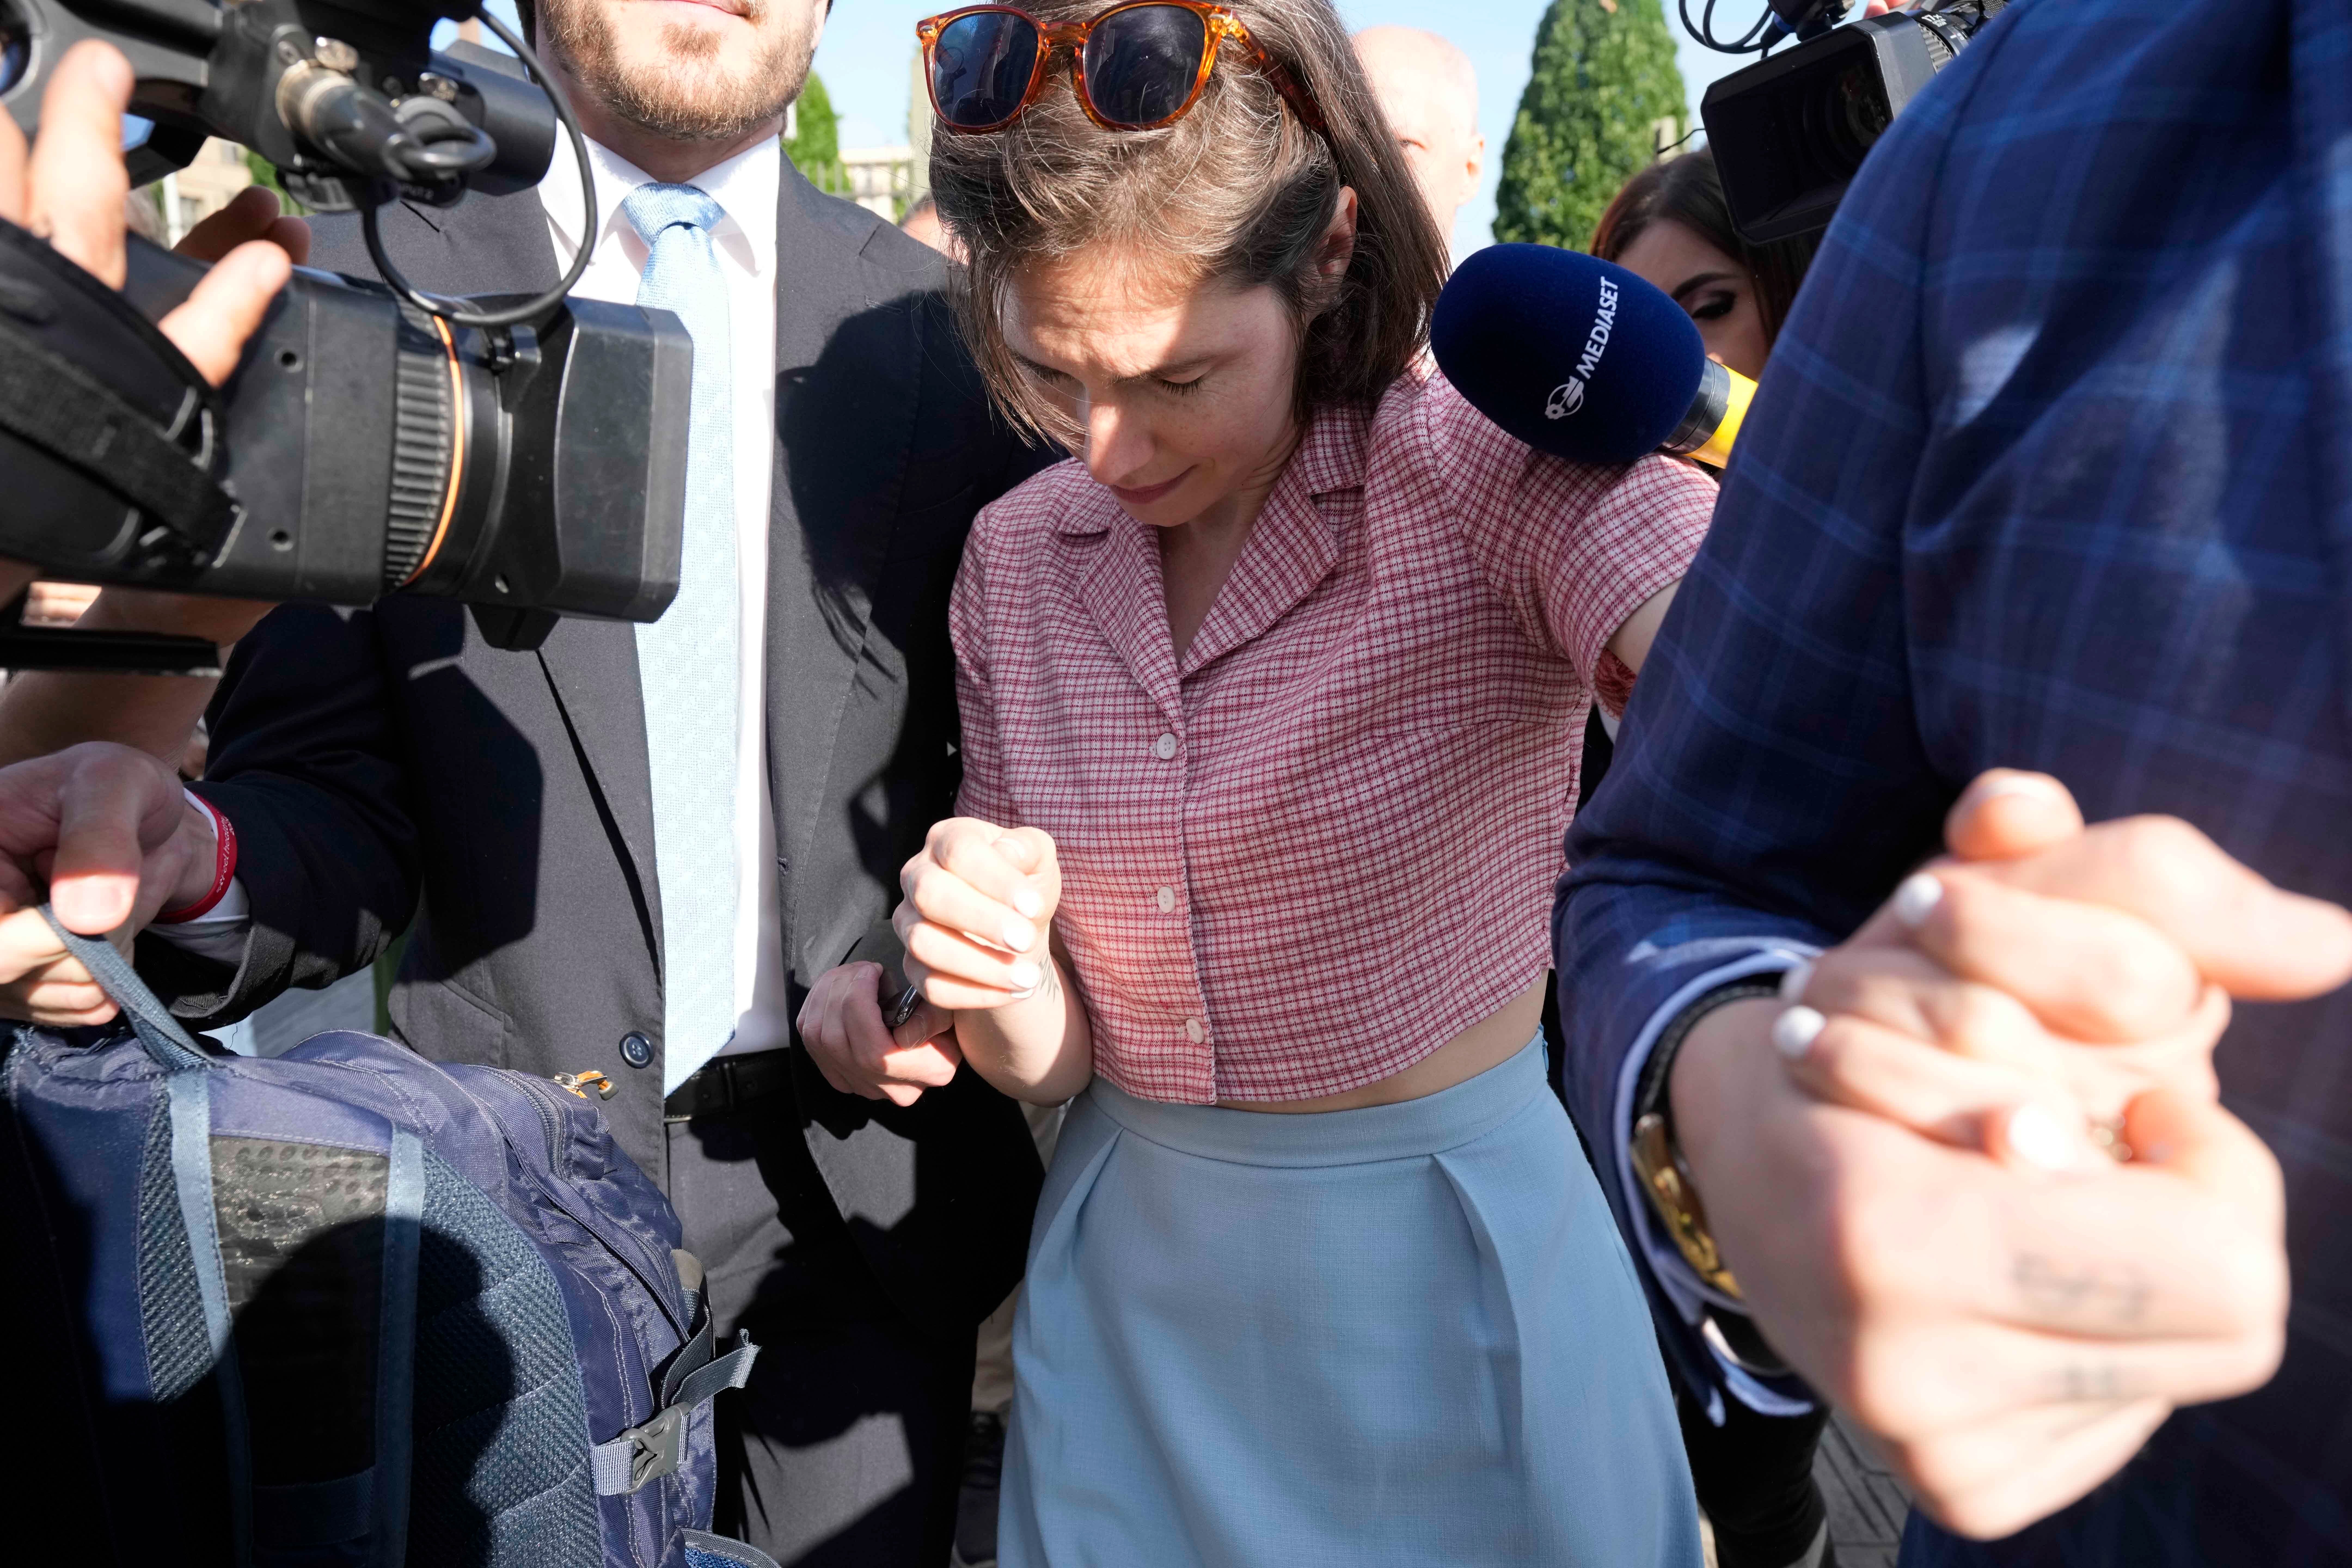 Knox was jostled by members of the media as she arrived